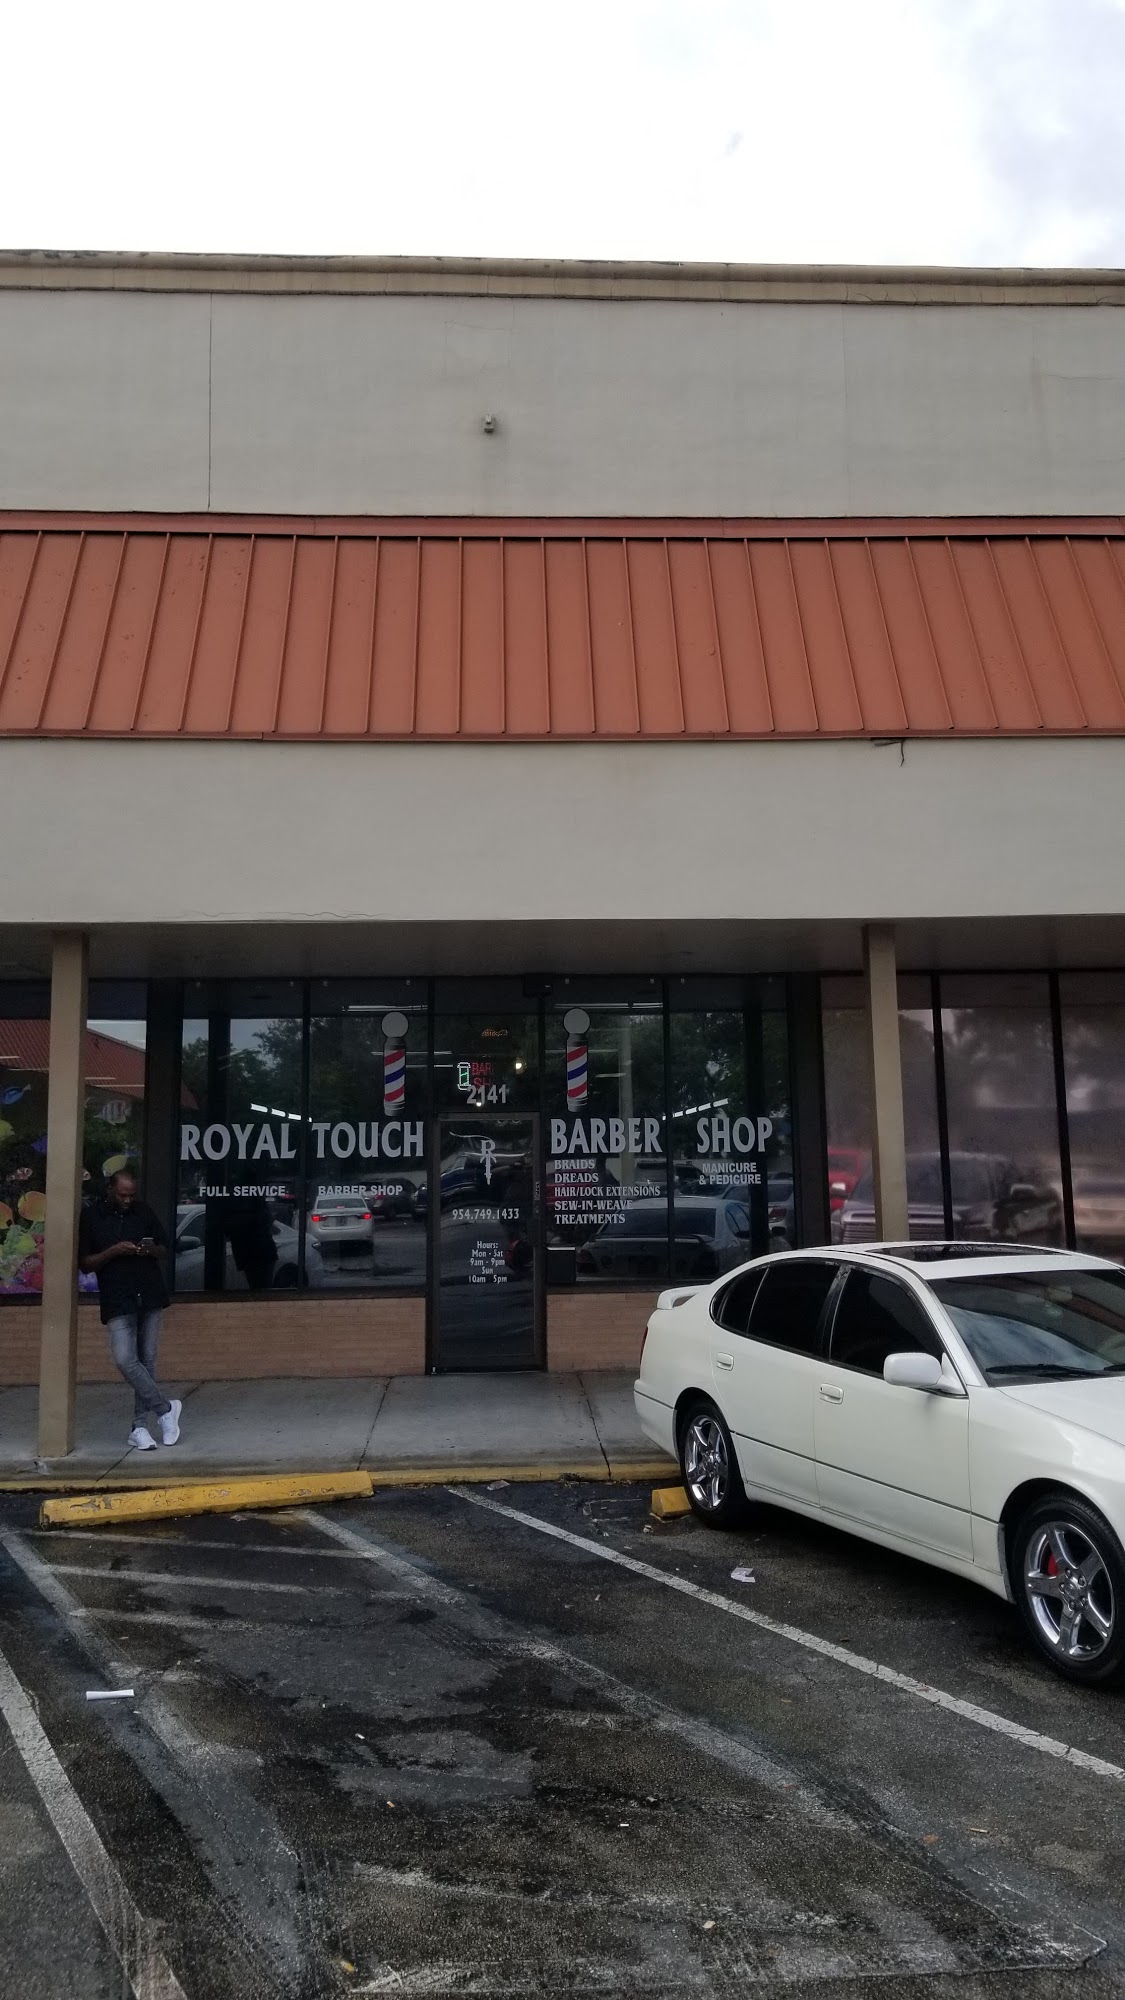 Royal Touch Barber Shop